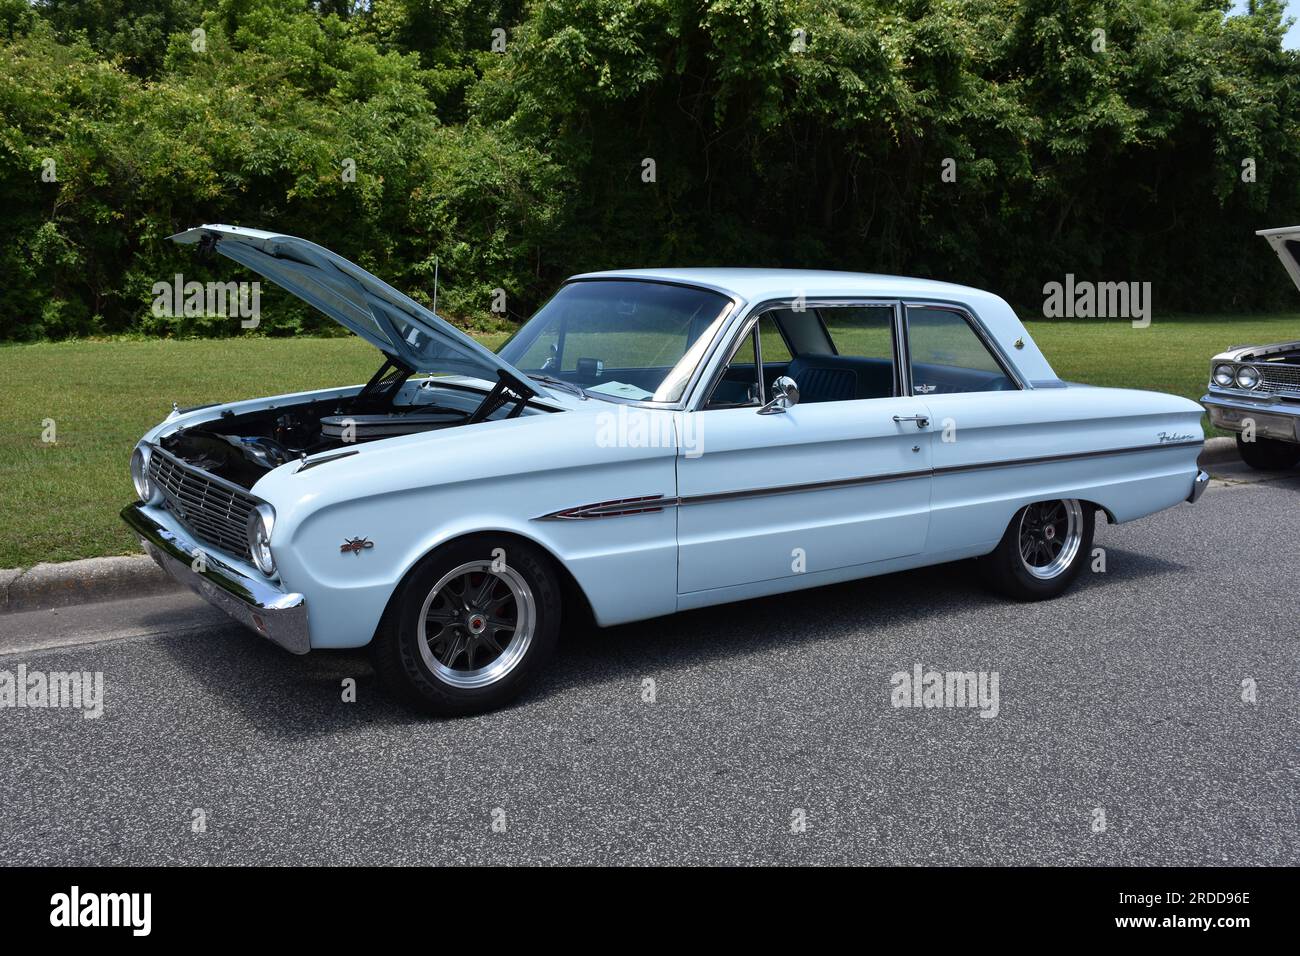 A 1960s Ford Falcon on display at a car show. Stock Photo